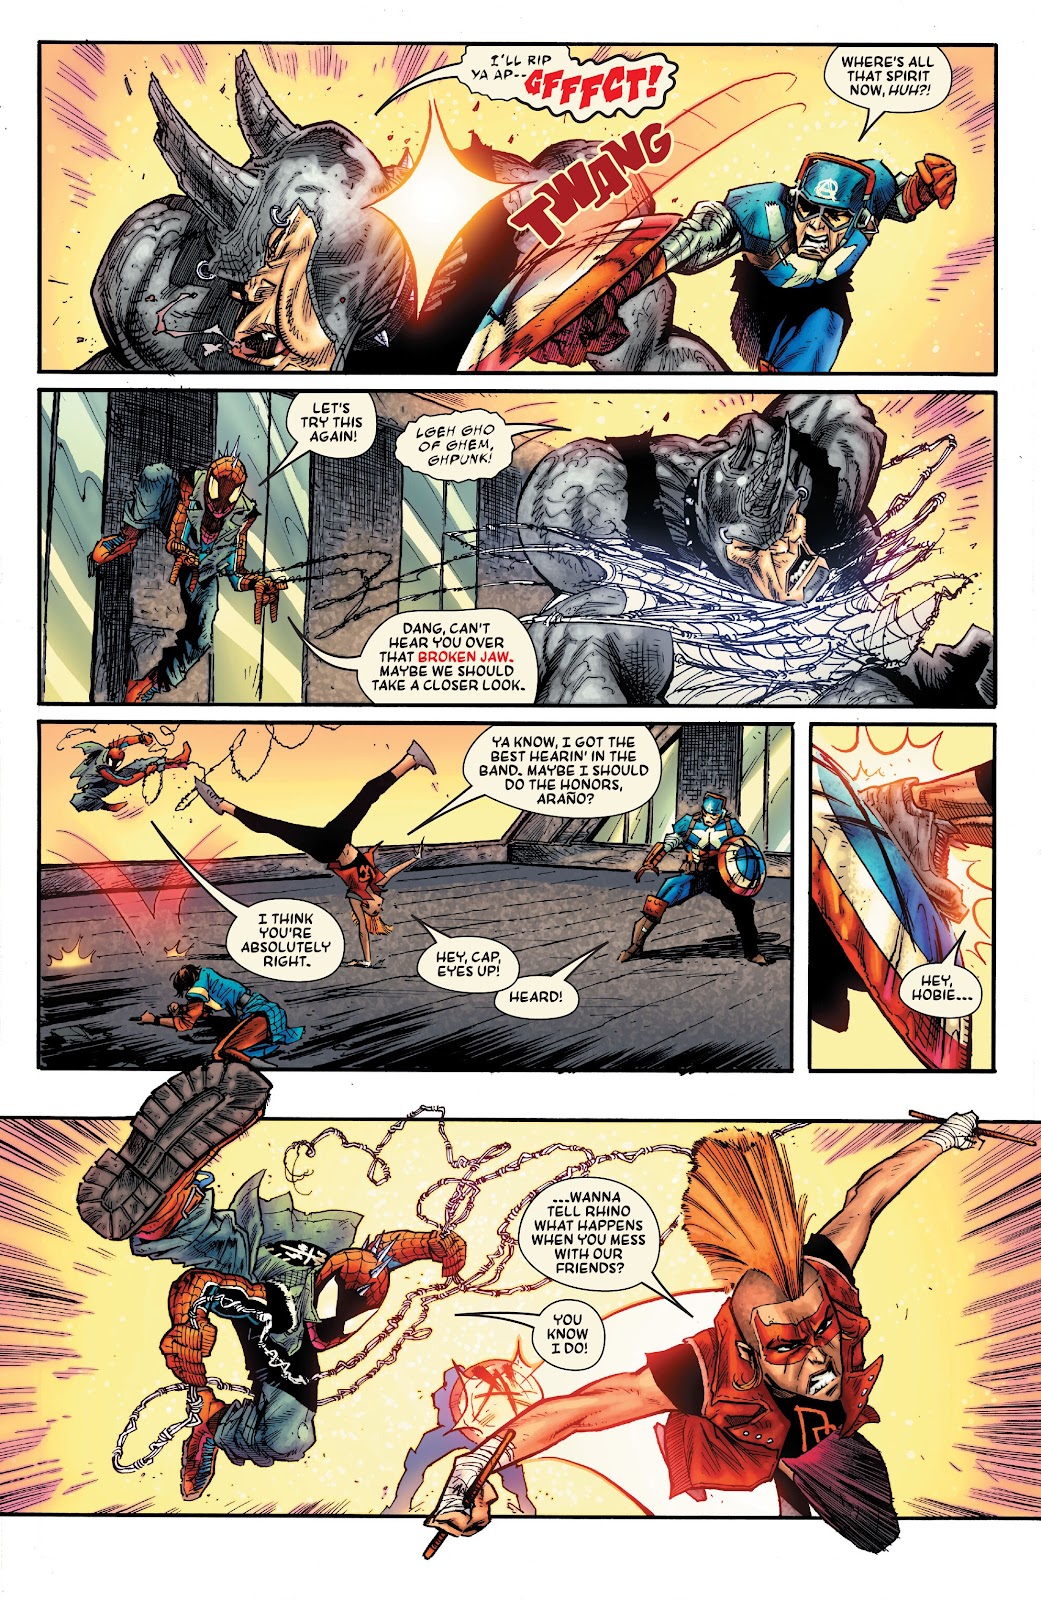 Spider-Punk: Arms Race issue 2 - Page 17